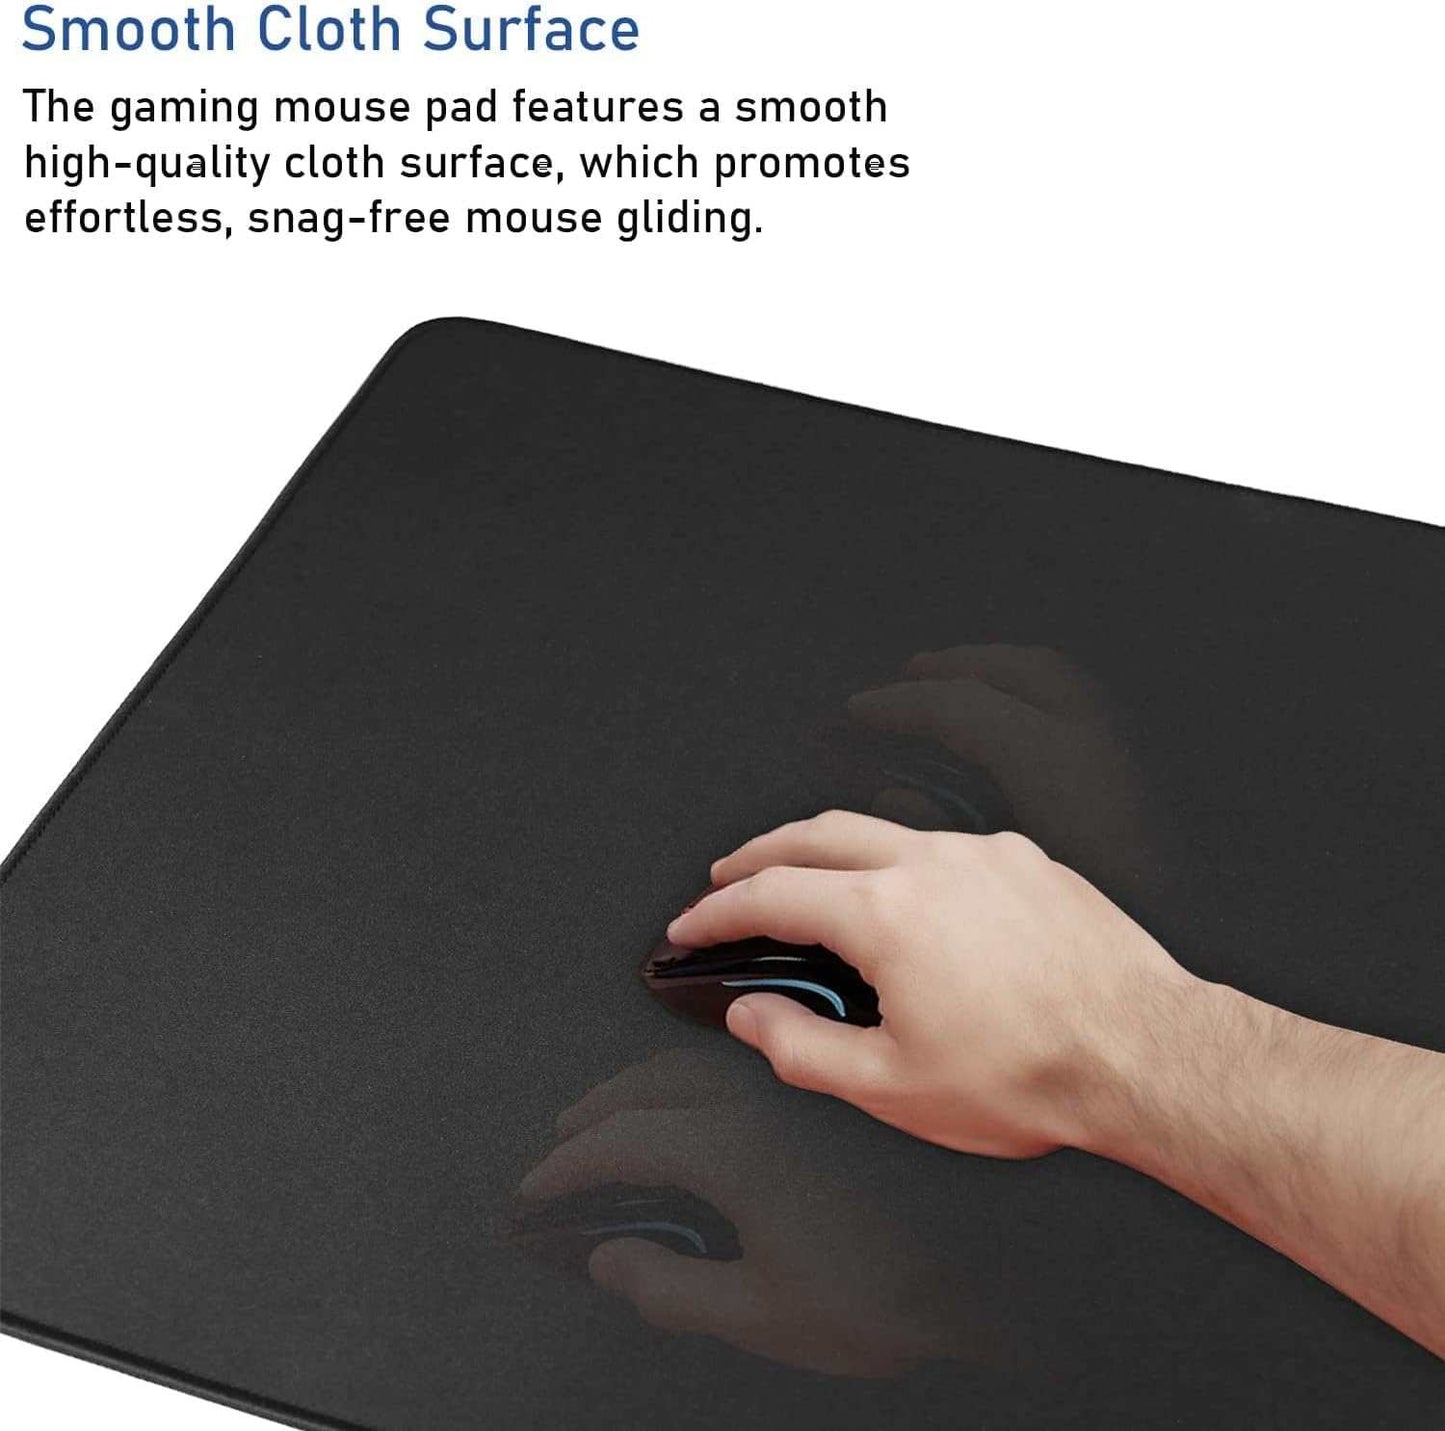 Large Extended Gaming Mouse Pad with Stitched Edges, (31.5X15.7In) Dur 
 
  Experience the ultimate in gaming comfort with this large extended gaming mouse pad. Its ultra-large size of 35 x 15.7 x 0.12in easily fits your desktop for a indoorTOPDEALTOPDEAL-Slip Natural Rubber Base, Waterproof Computer Keyboard Pad Mat